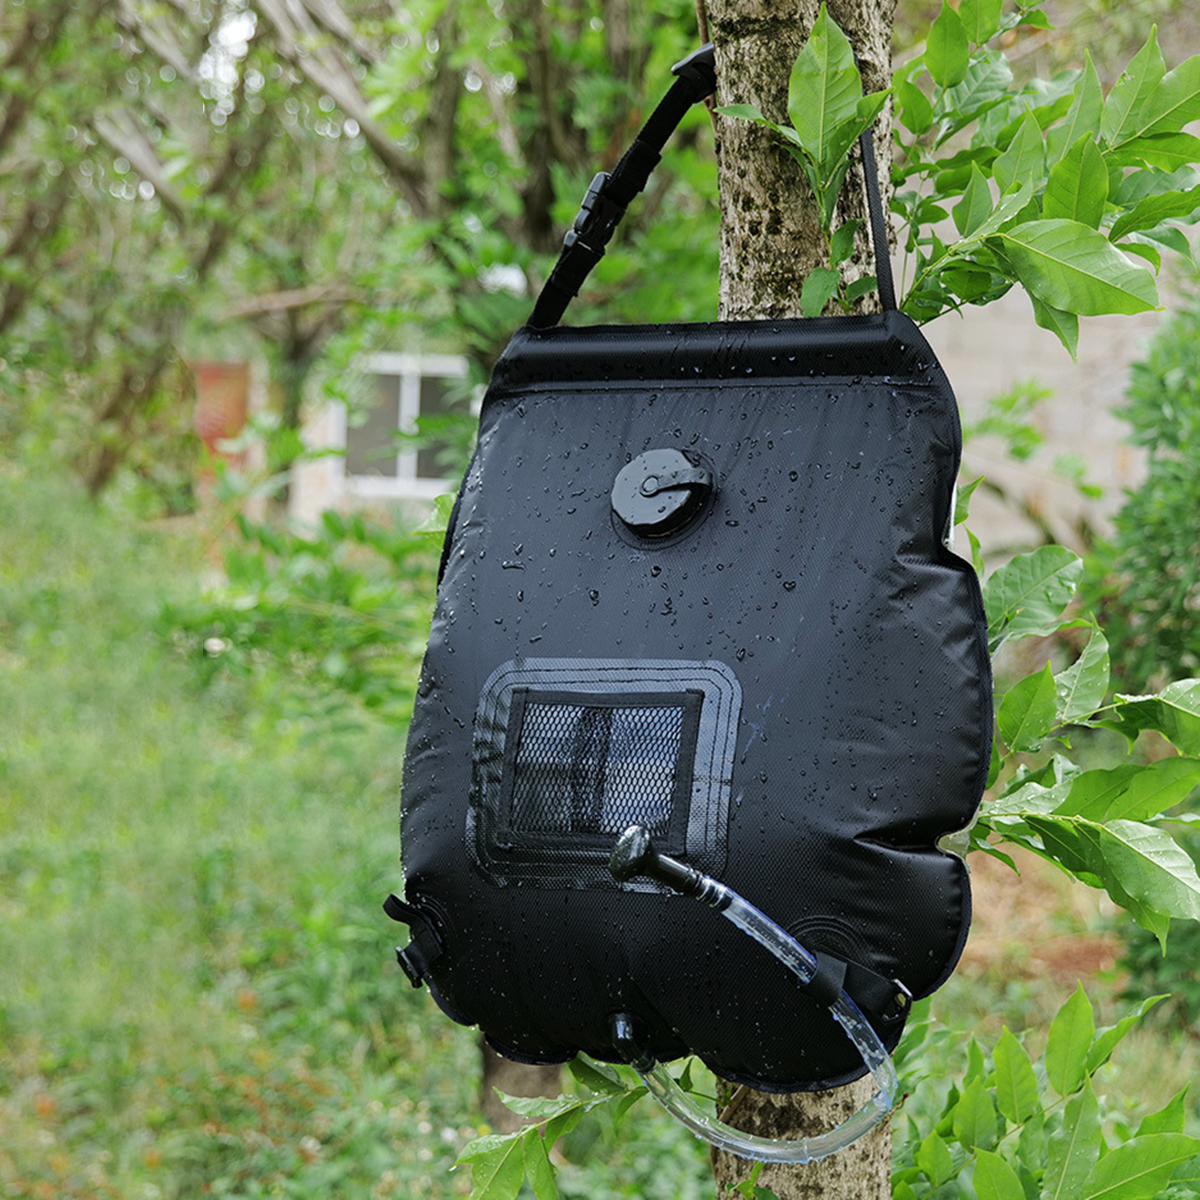 20L-Portable-Solar-Heated-Shower-Water-Bathing-Bag-Outdoor-Camping-Hiking-Water-Bag-With-Temperature-1790788-4